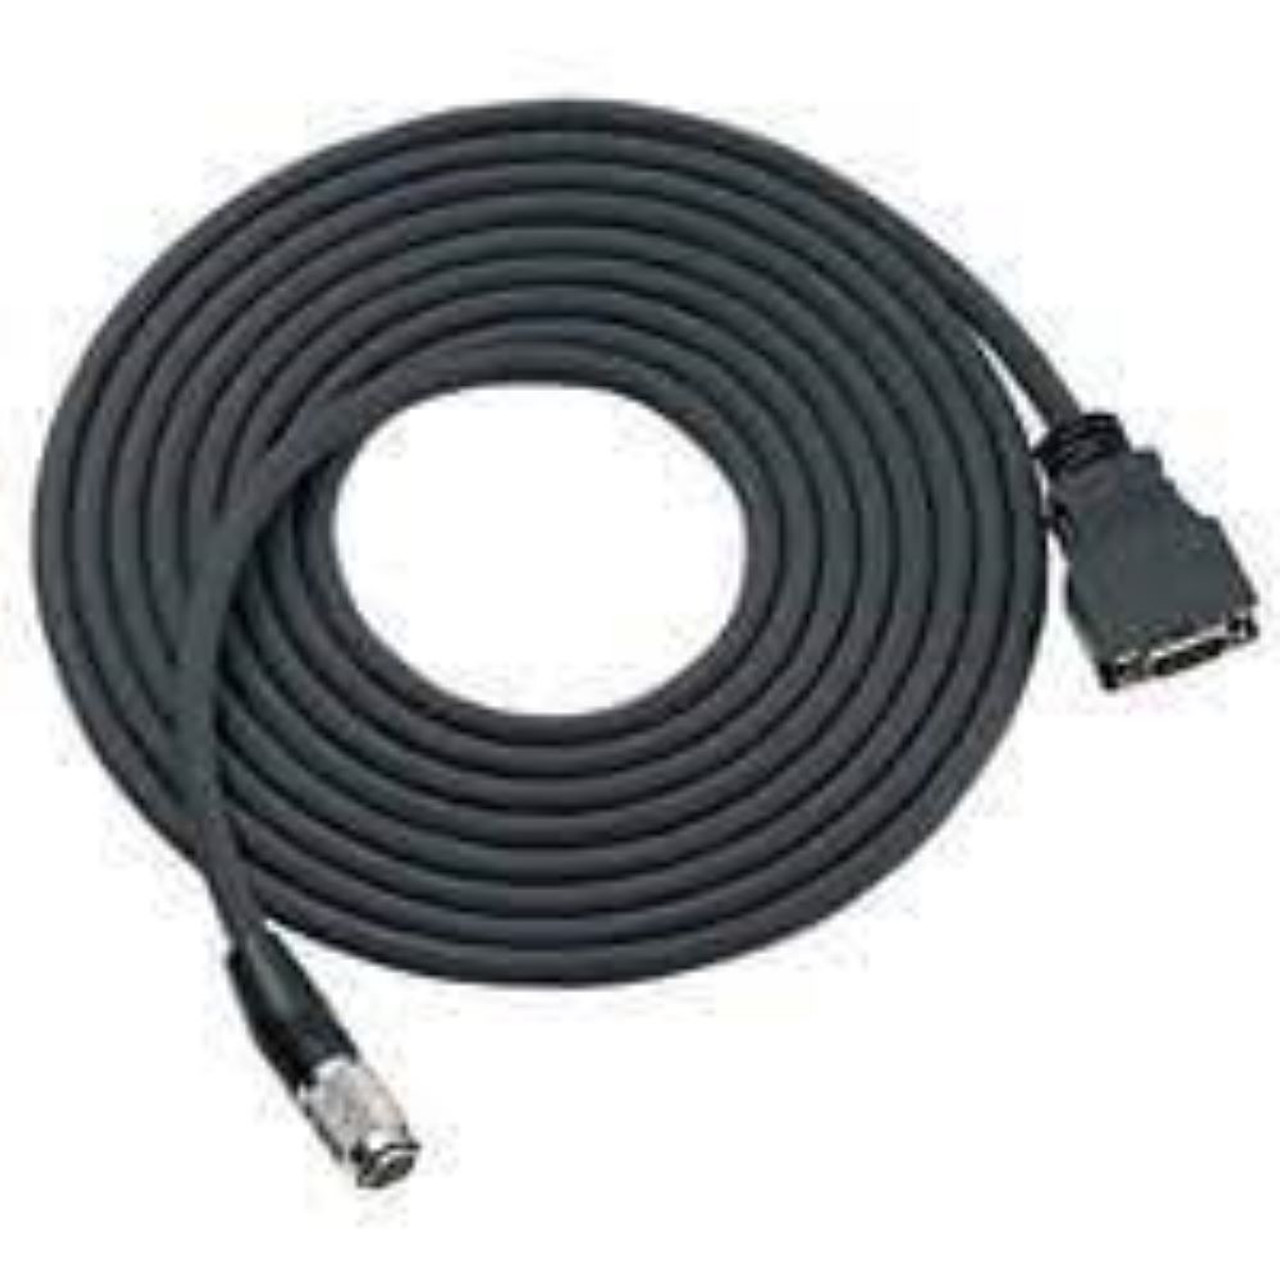 Keyence CA-CN5 Vision Systems System Camera Cable, 5 M Length [New]